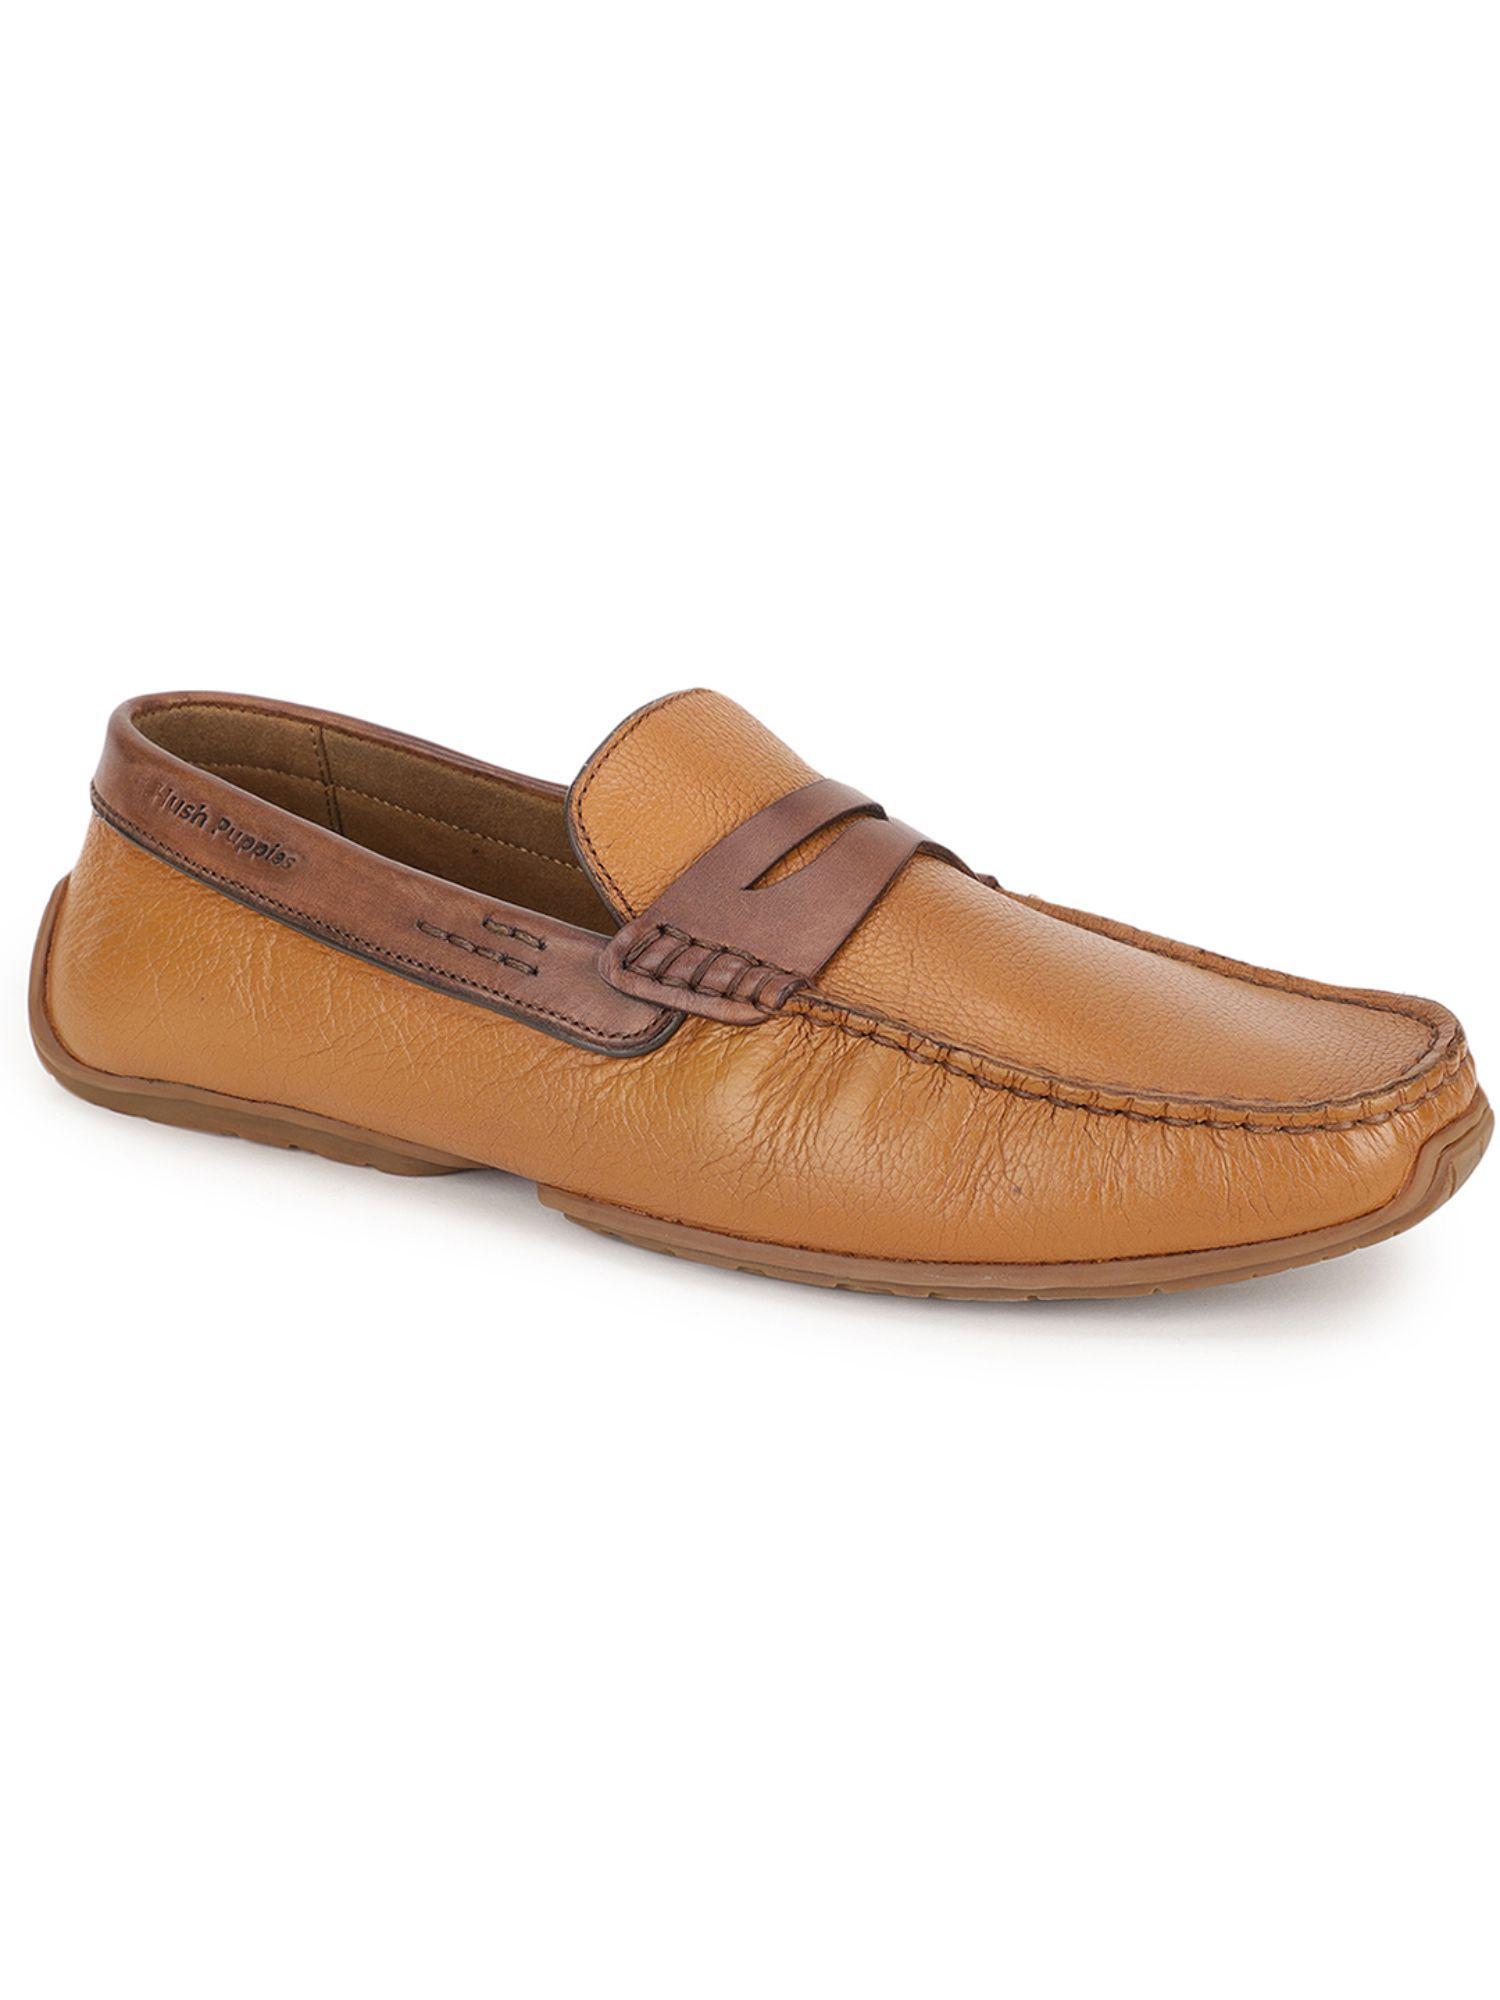 mens tan slip on casual loafers